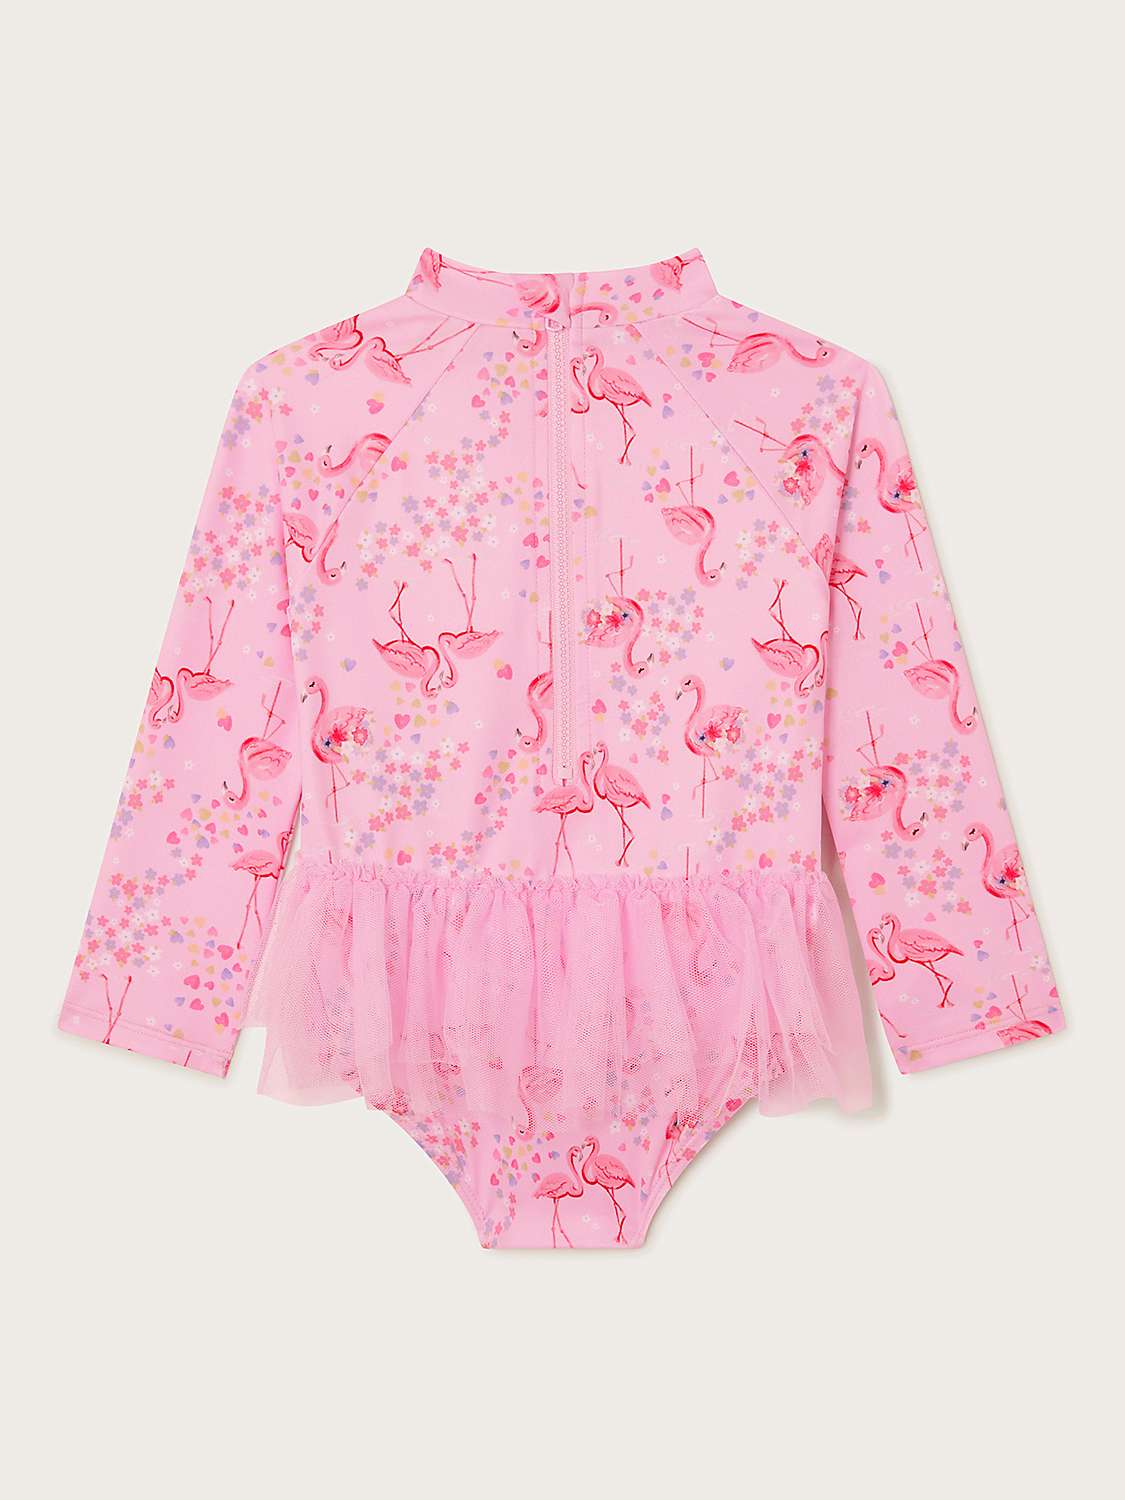 Buy Monsoon Baby UPF50 Flamingo Print Frill Swimsuit, Pink Online at johnlewis.com